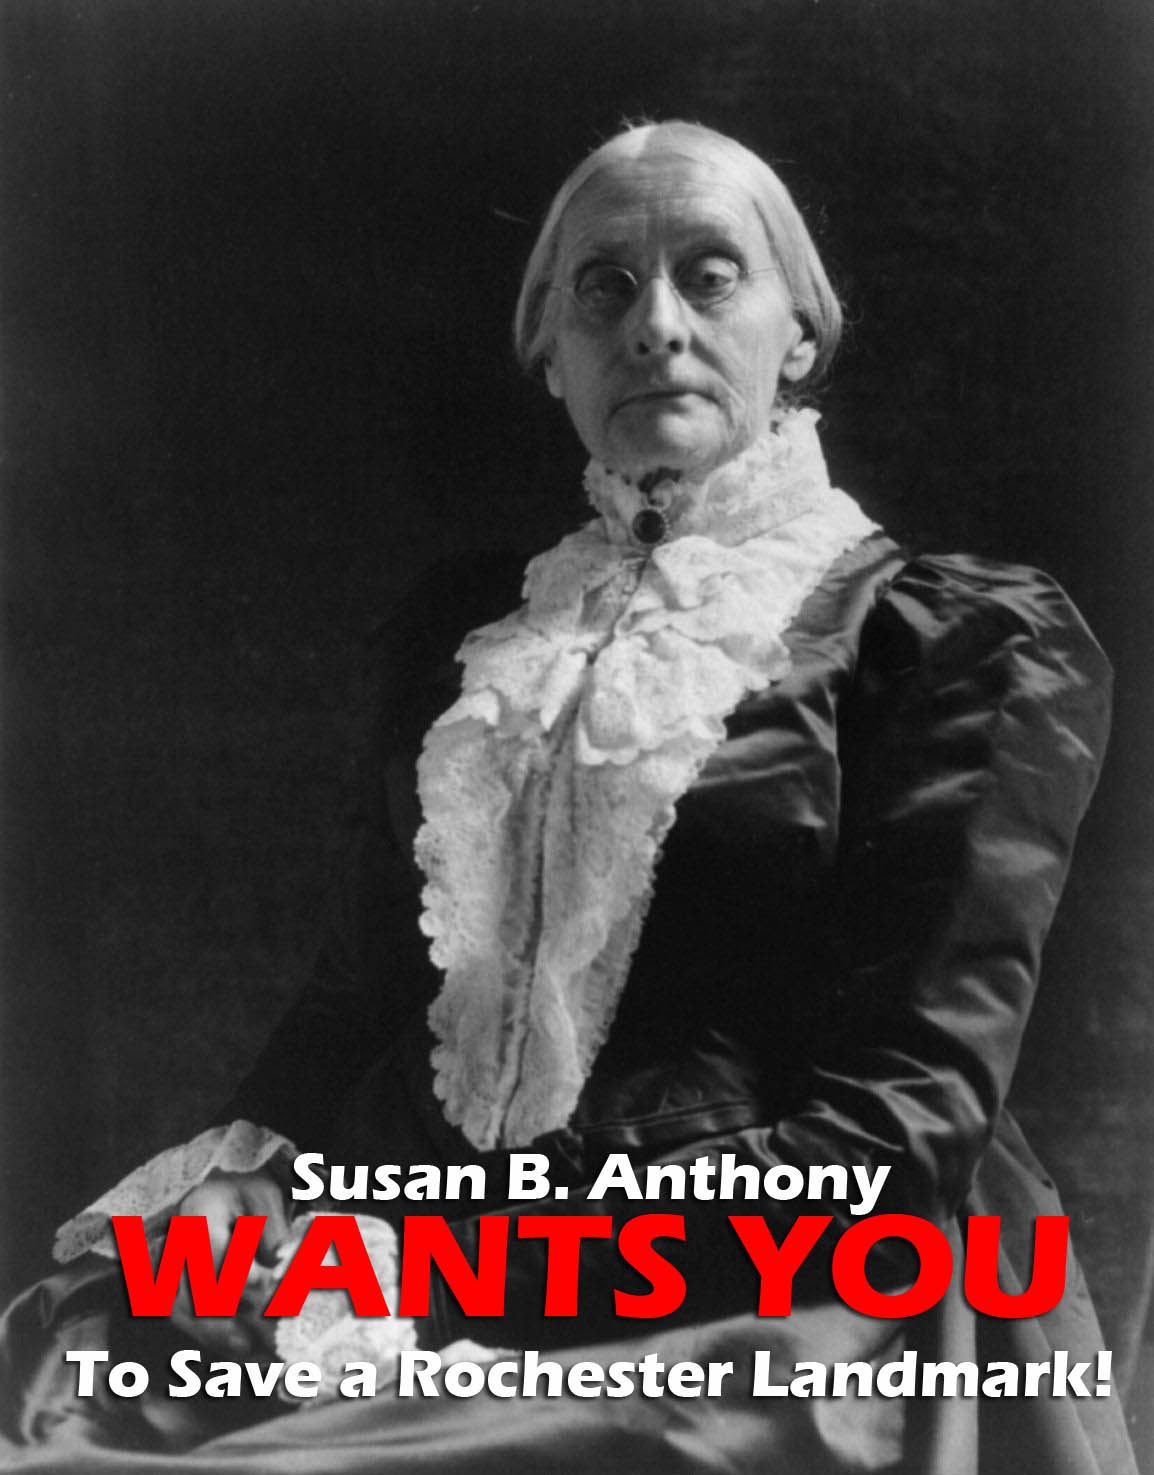 Susan B. Anthony wants you. She's asking for volunteers to gather support to save a neighborhood landmark.